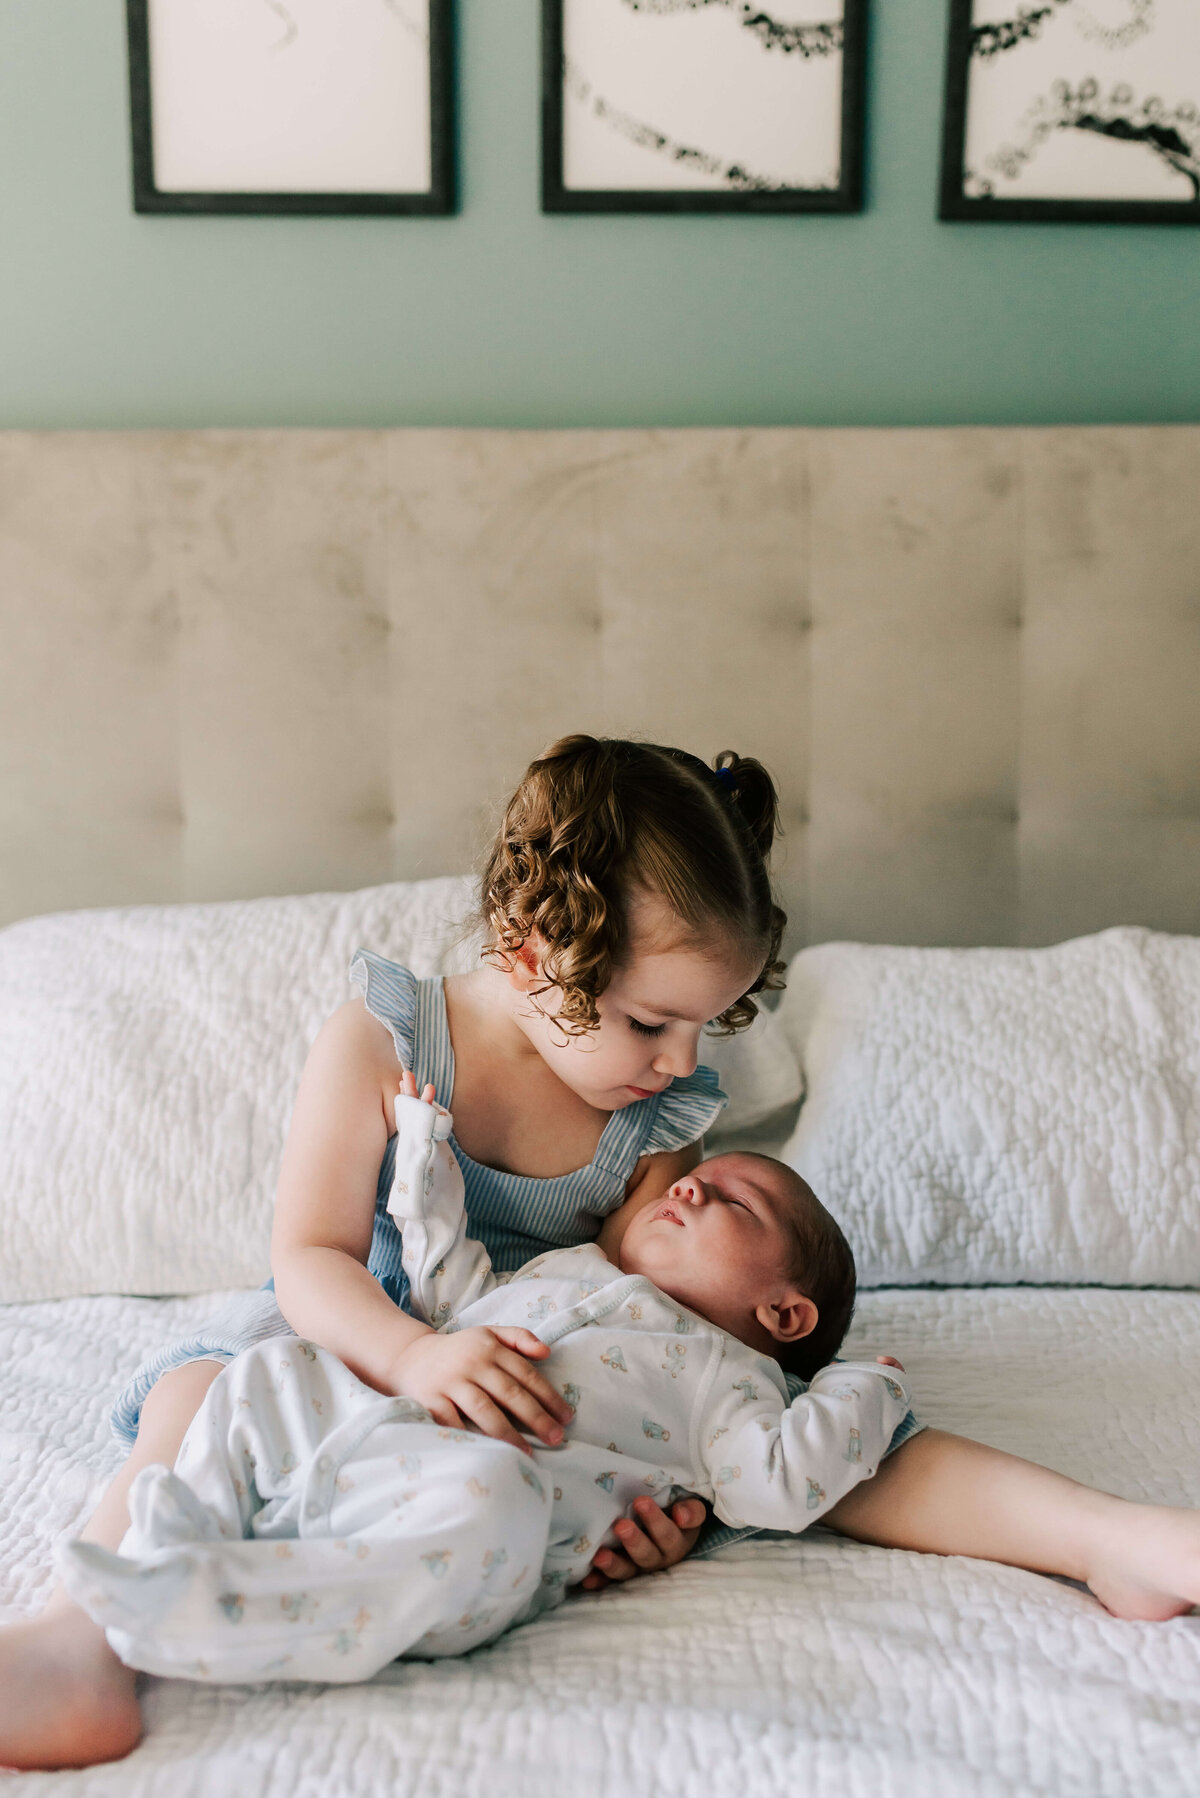 A new big sister sitting on a bed holding her baby brother, taken by Denise Van Photography